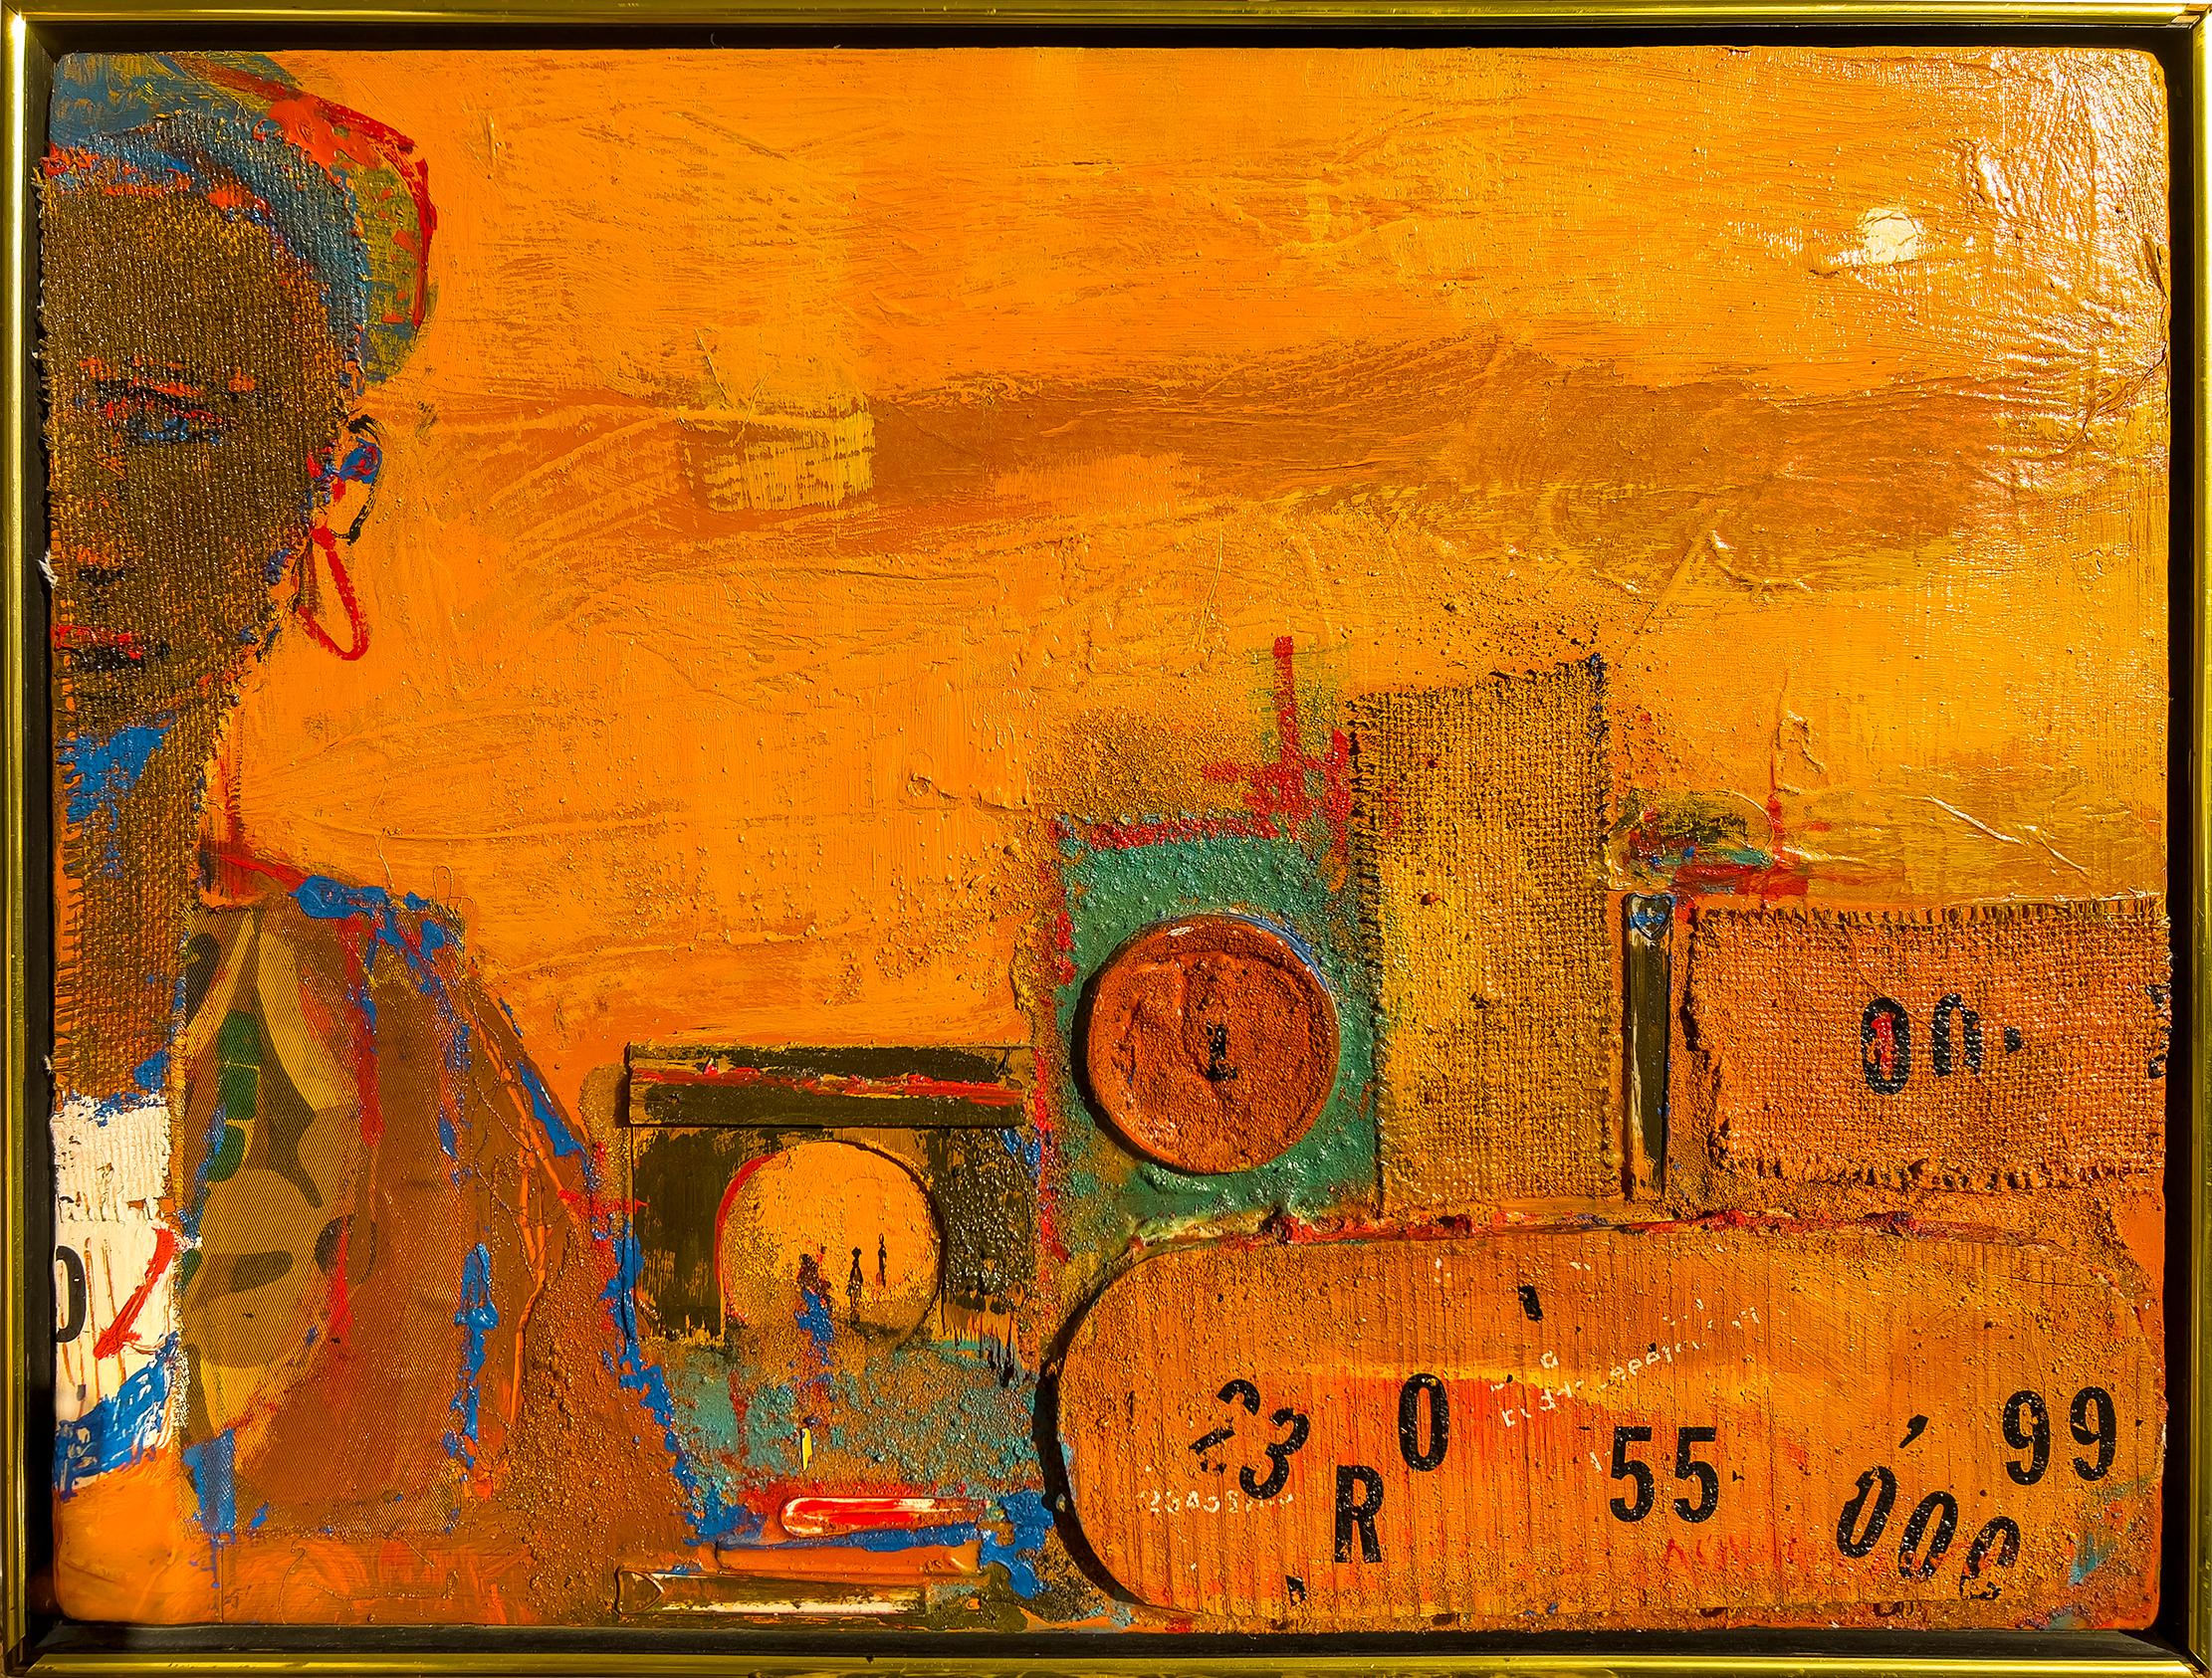 Africa - Collage Painting in Orange - African American Artist 